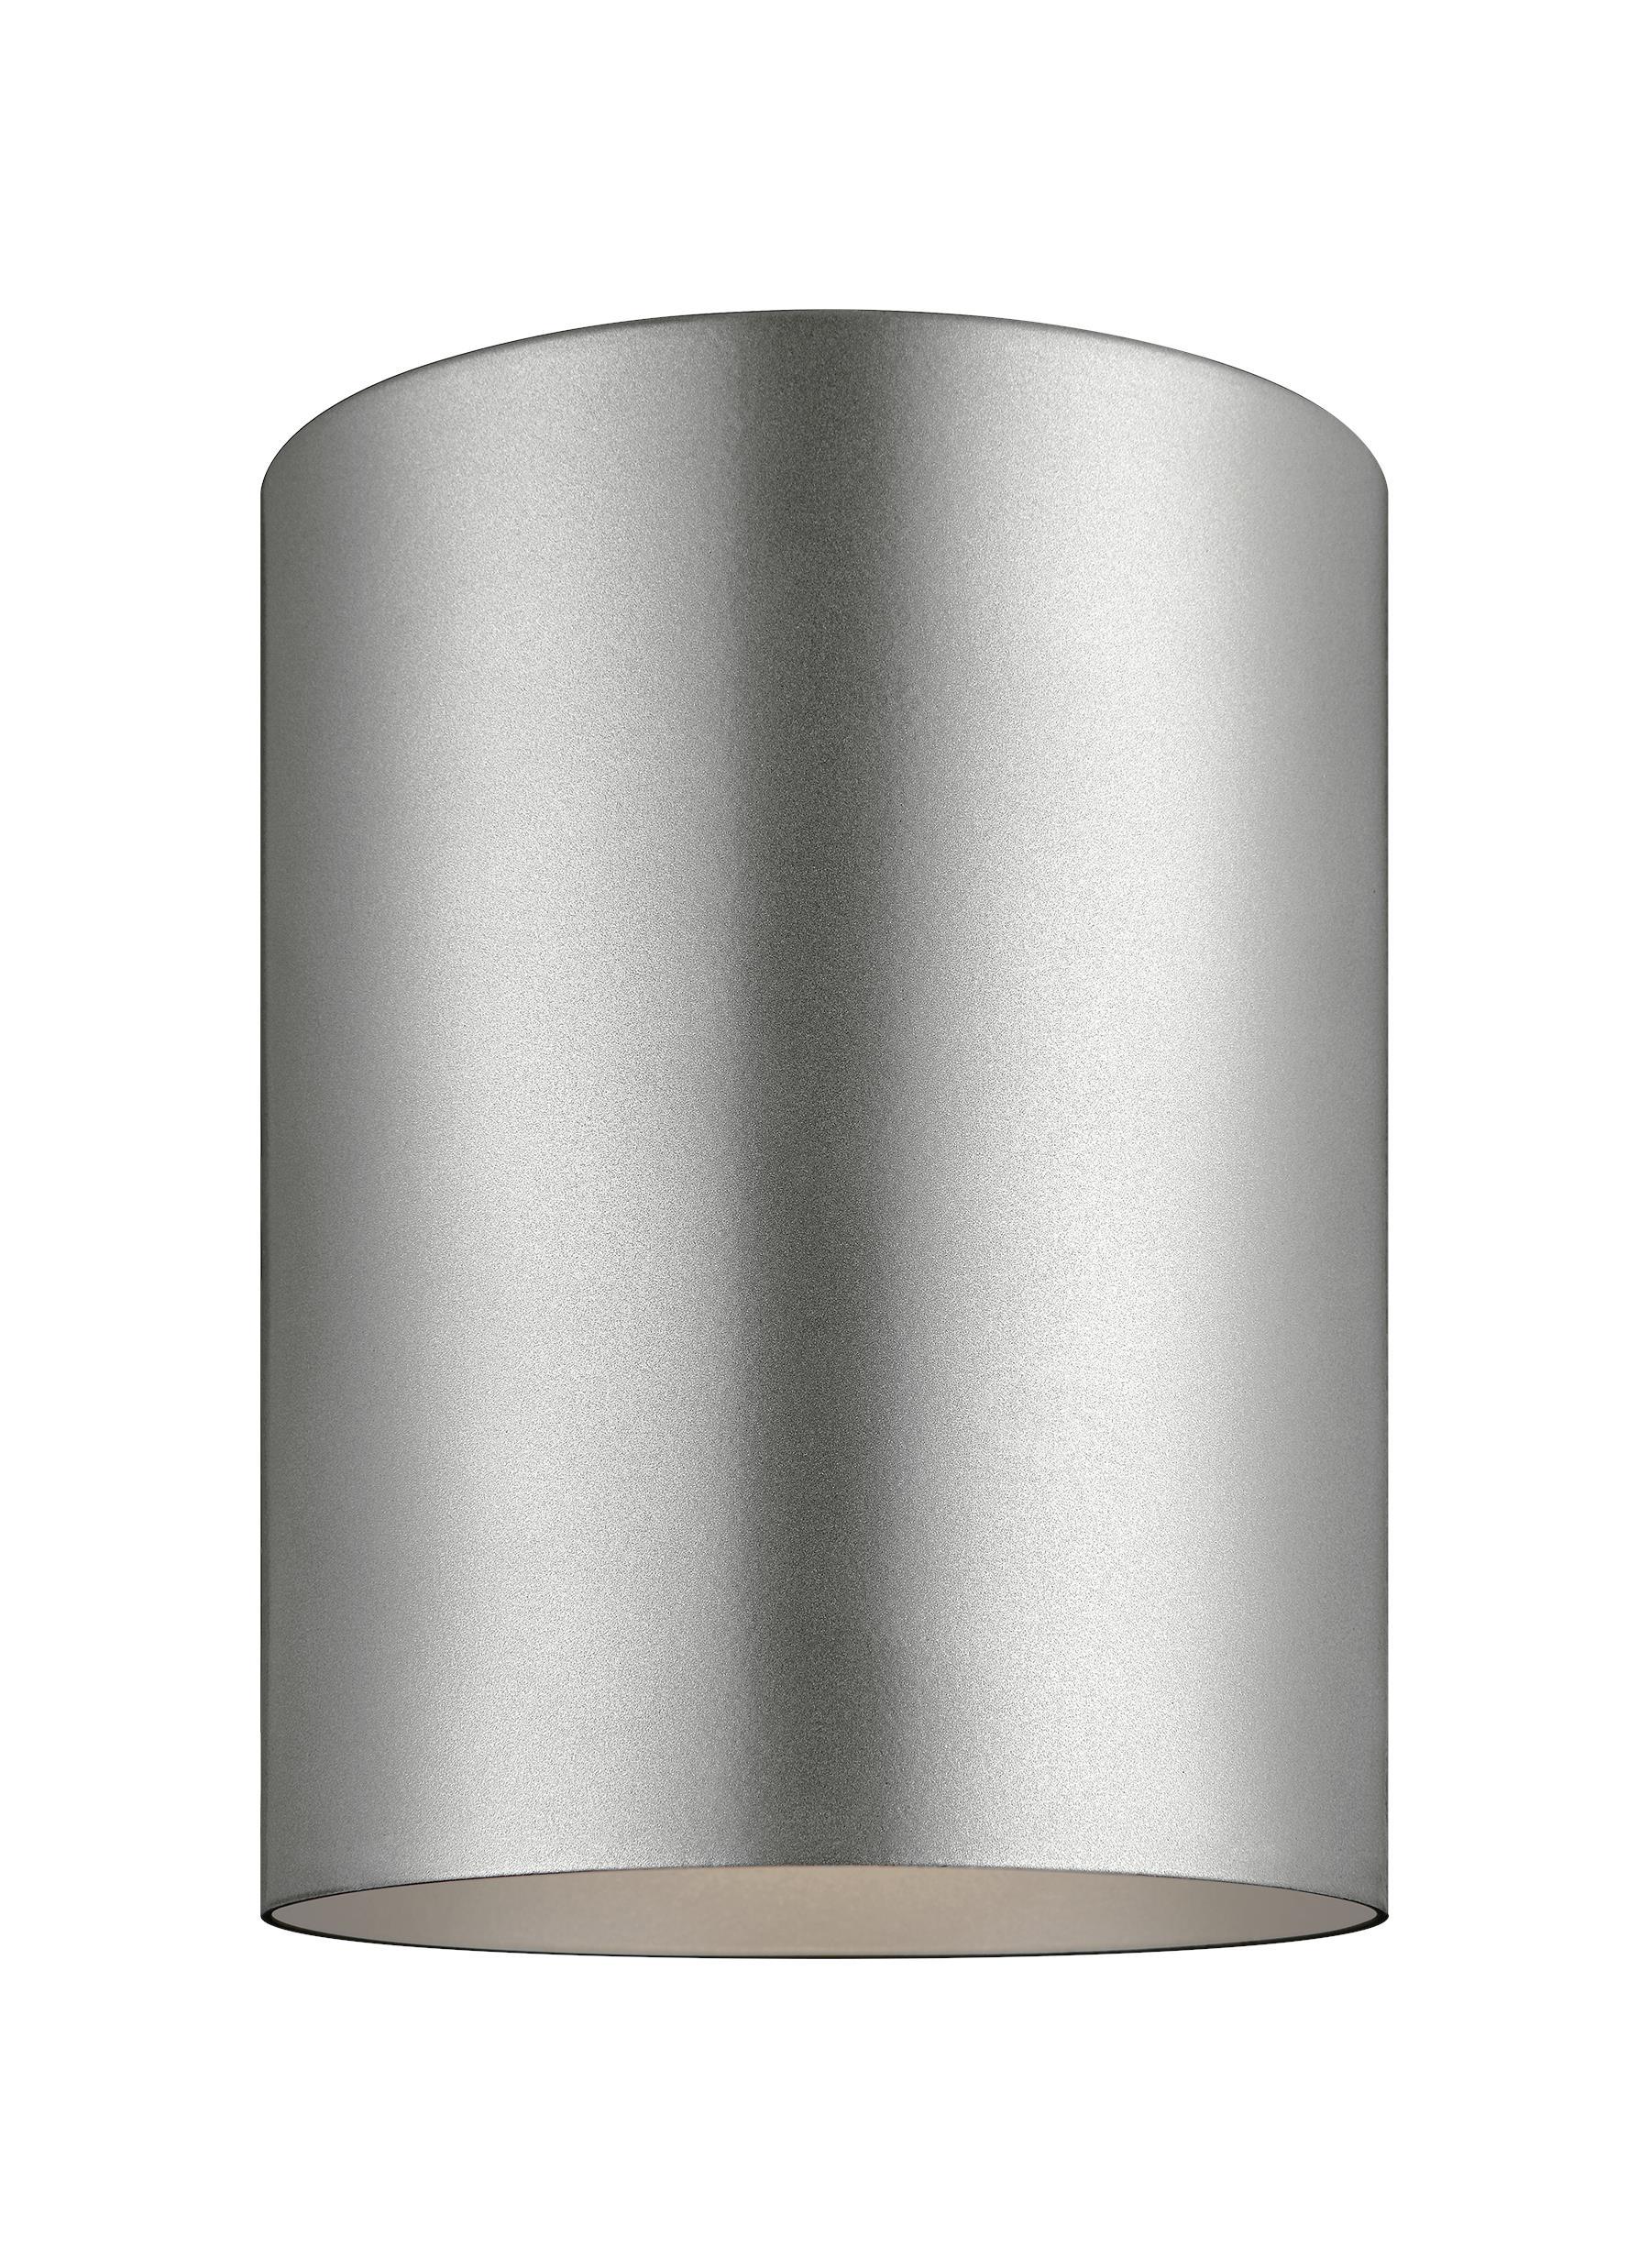 Small LED Ceiling Flush Mount - Painted Brushed Nickel Outdoor Sea Gull Lighting 